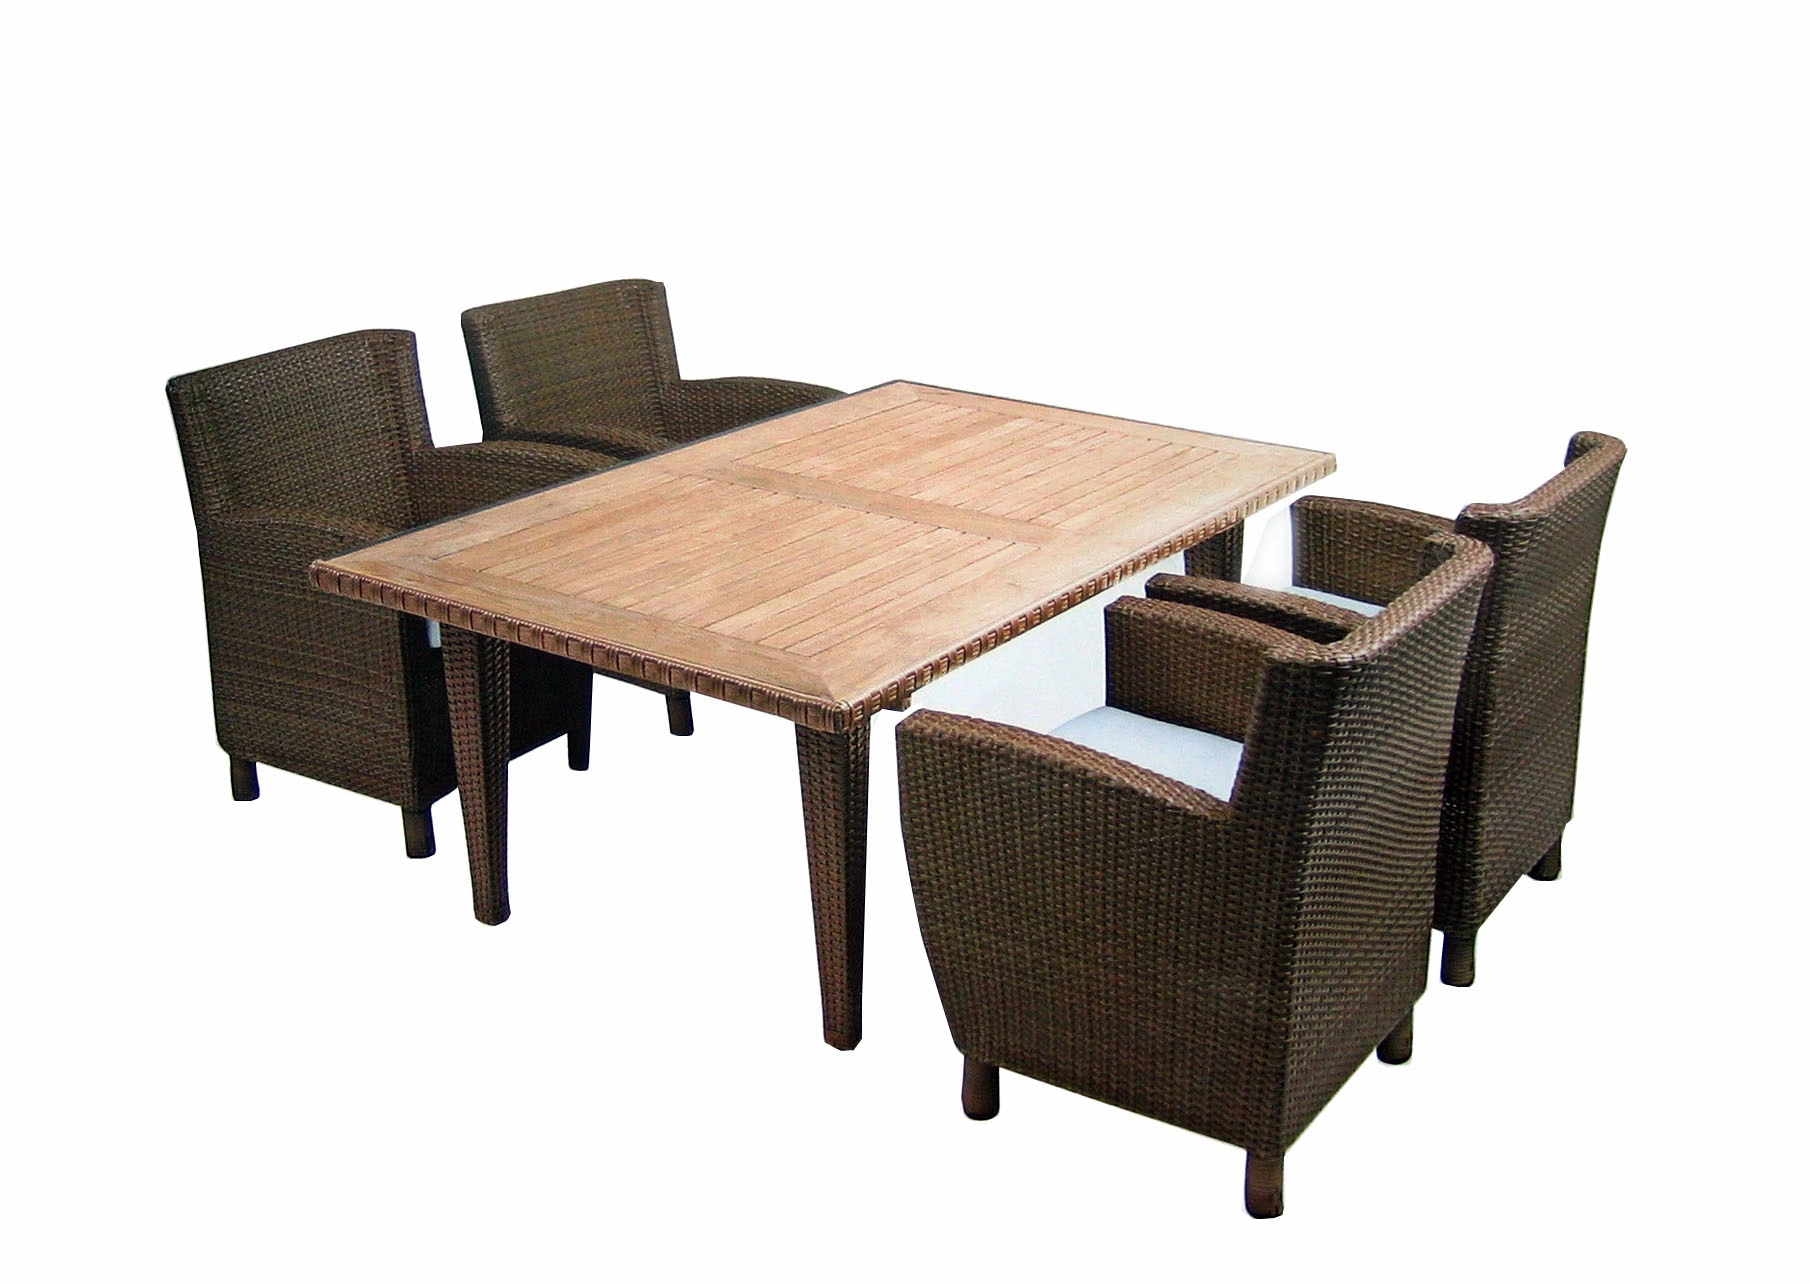 High Class Real Wood Table Sofa Chair Rattan Dining Furniture